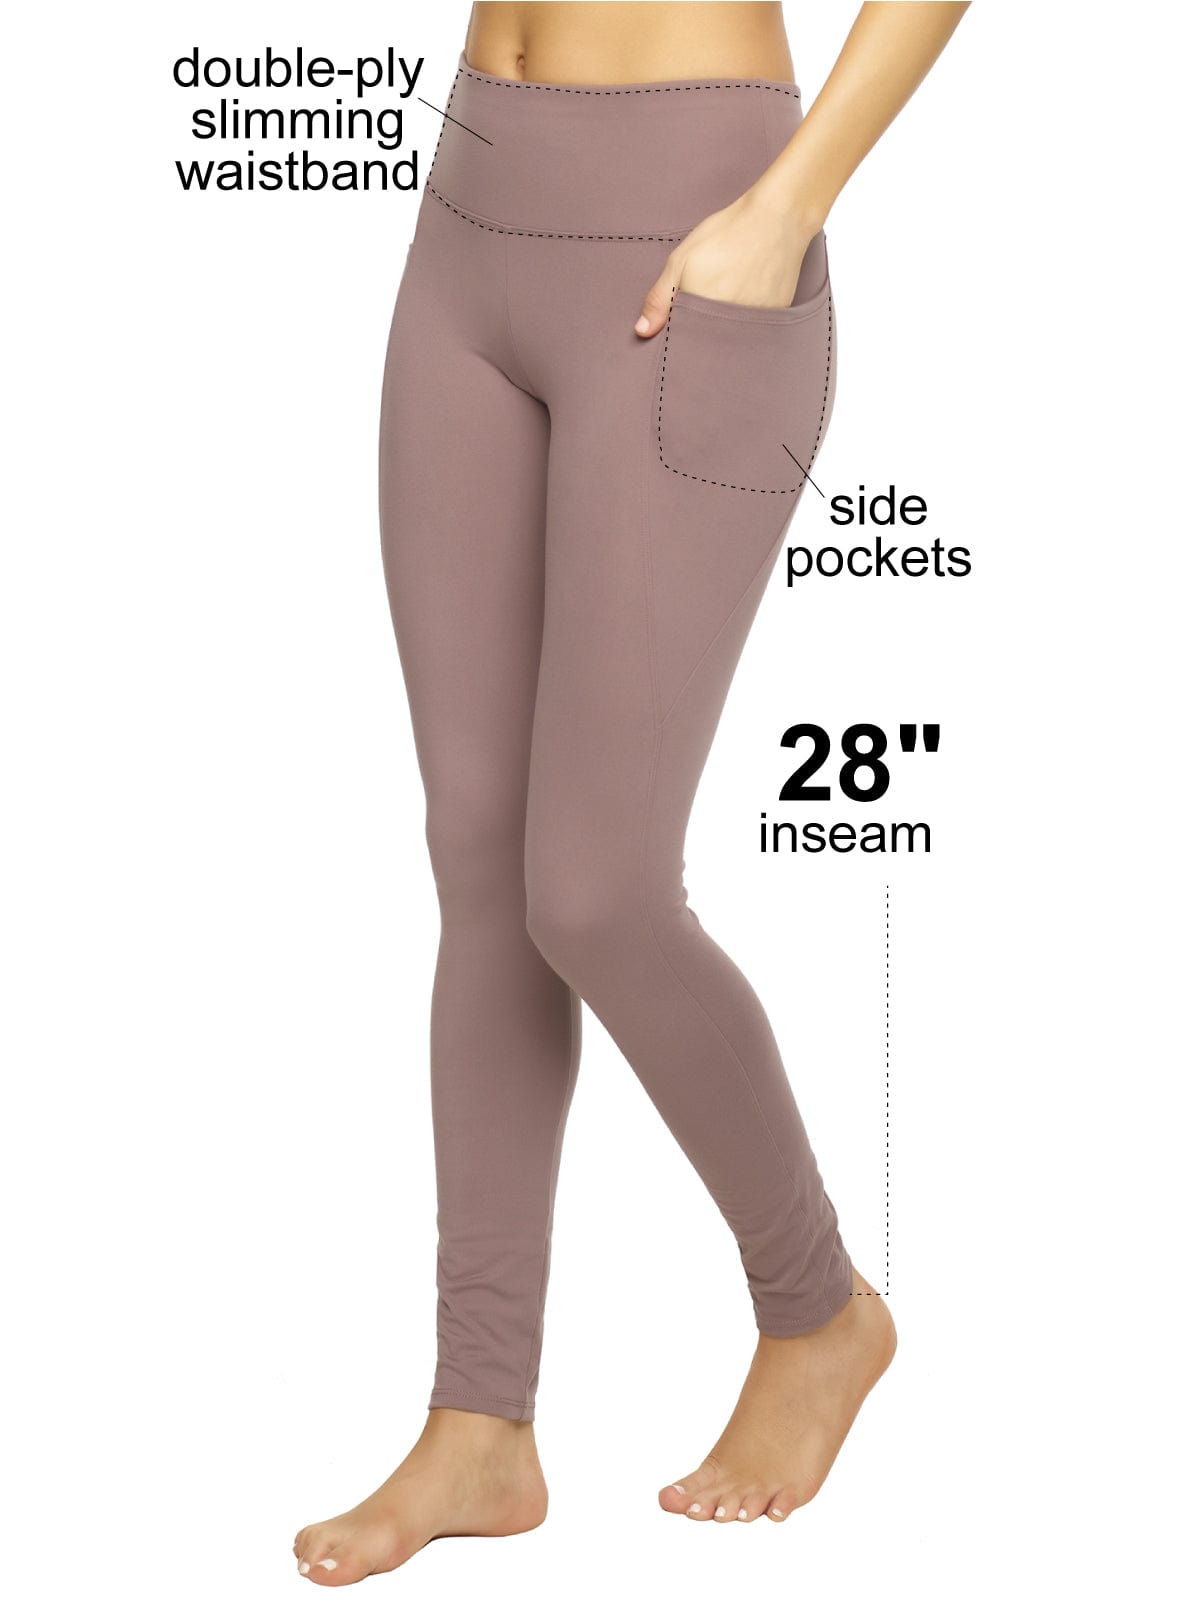 Athletic Pocket Leggings 2-Pack, Suitable for All Body Types